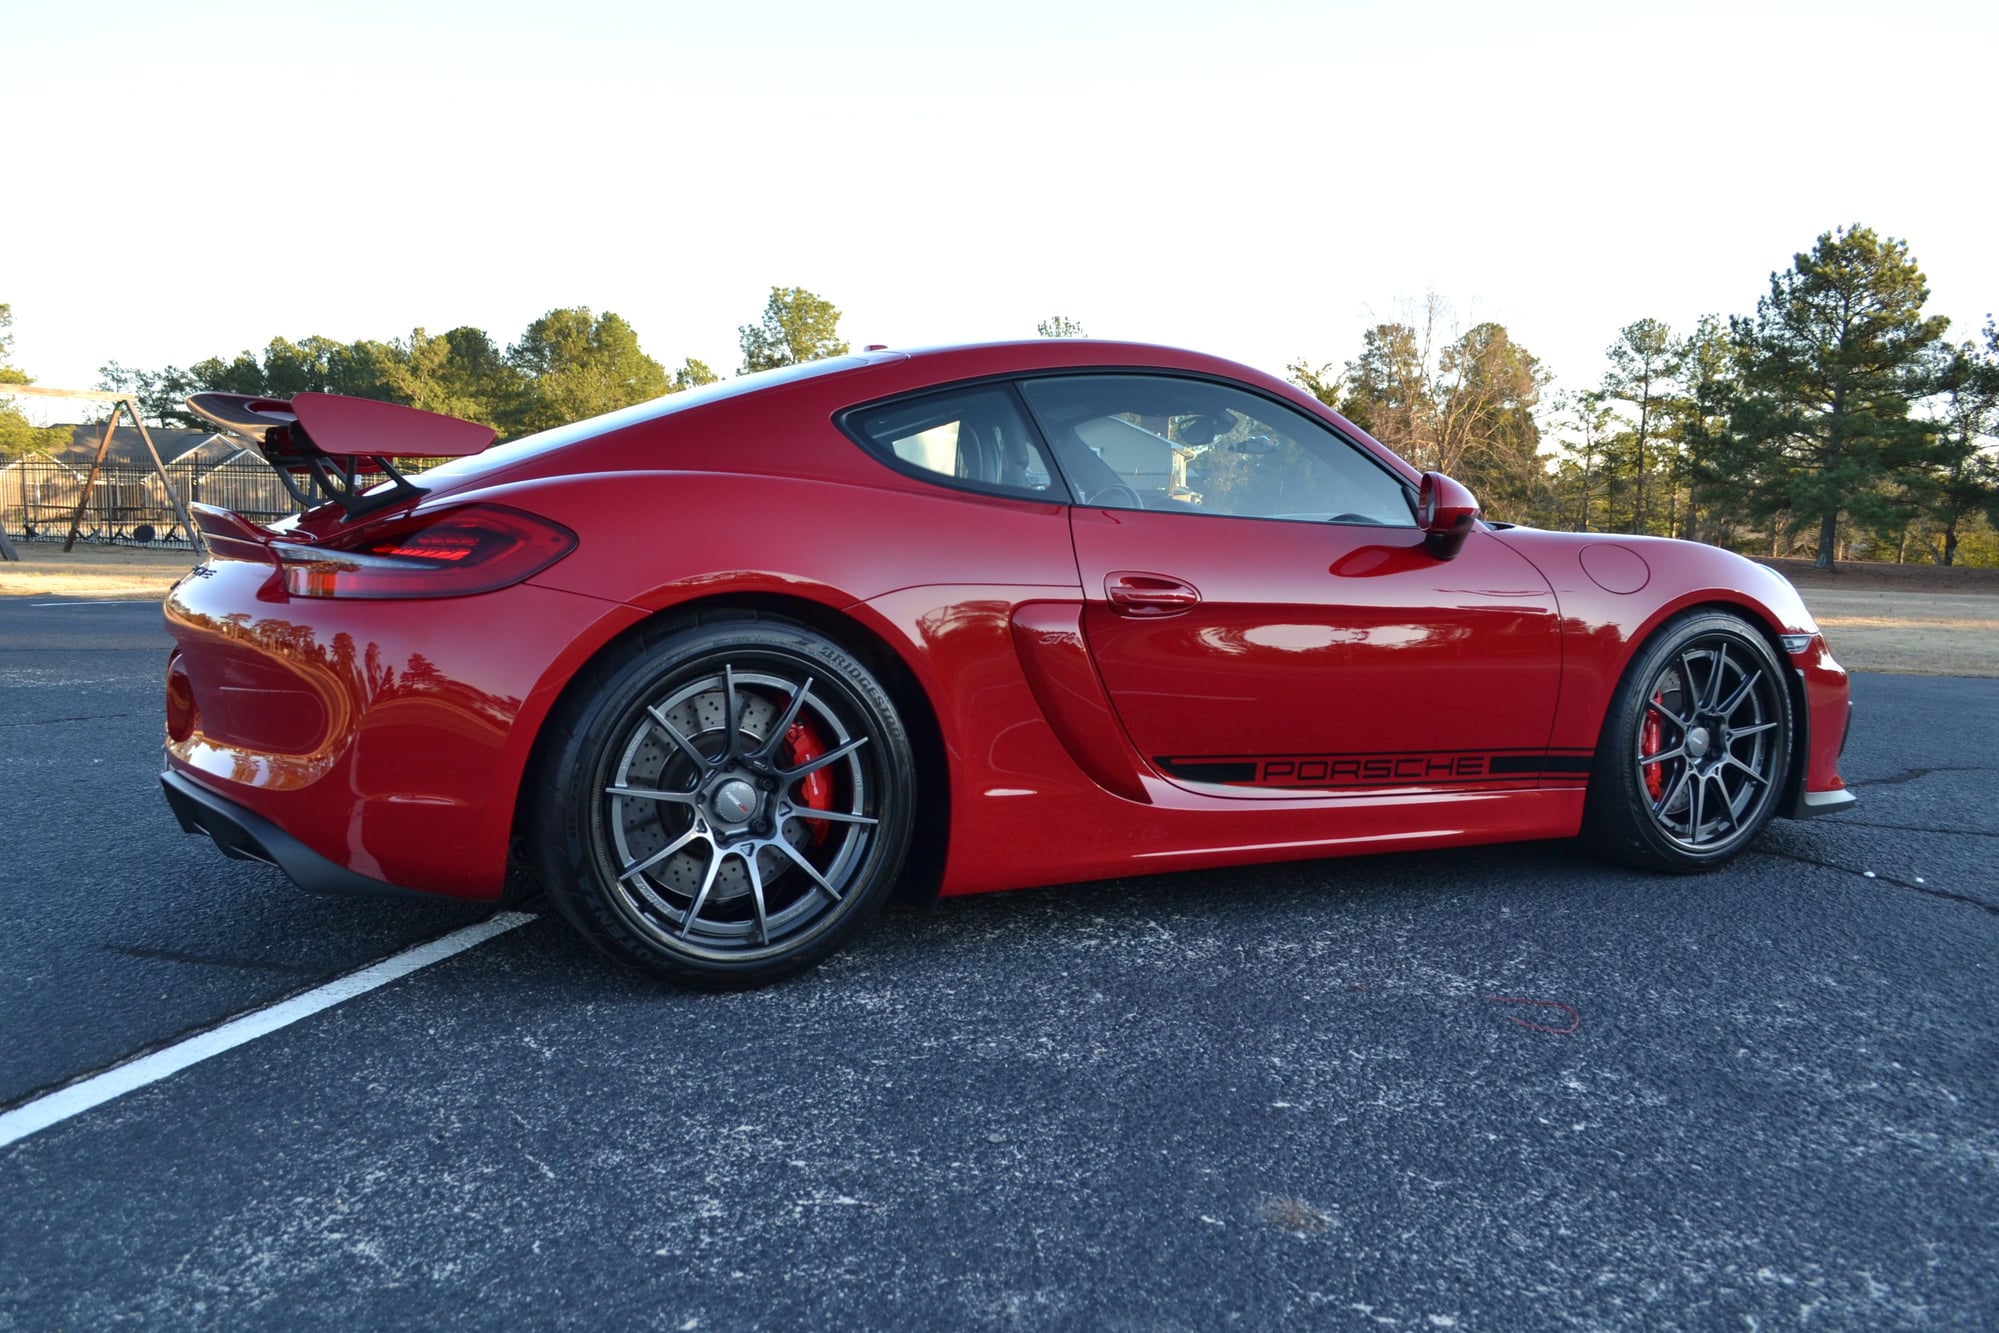 Wheels and Tires/Axles - FS GT4 Parts: IPD Plenum & GT3 throttle body, Forgeline CF205, Cantrell Roll Bar - New - 2016 Porsche Cayman GT4 - Sanford, NC 27332, United States